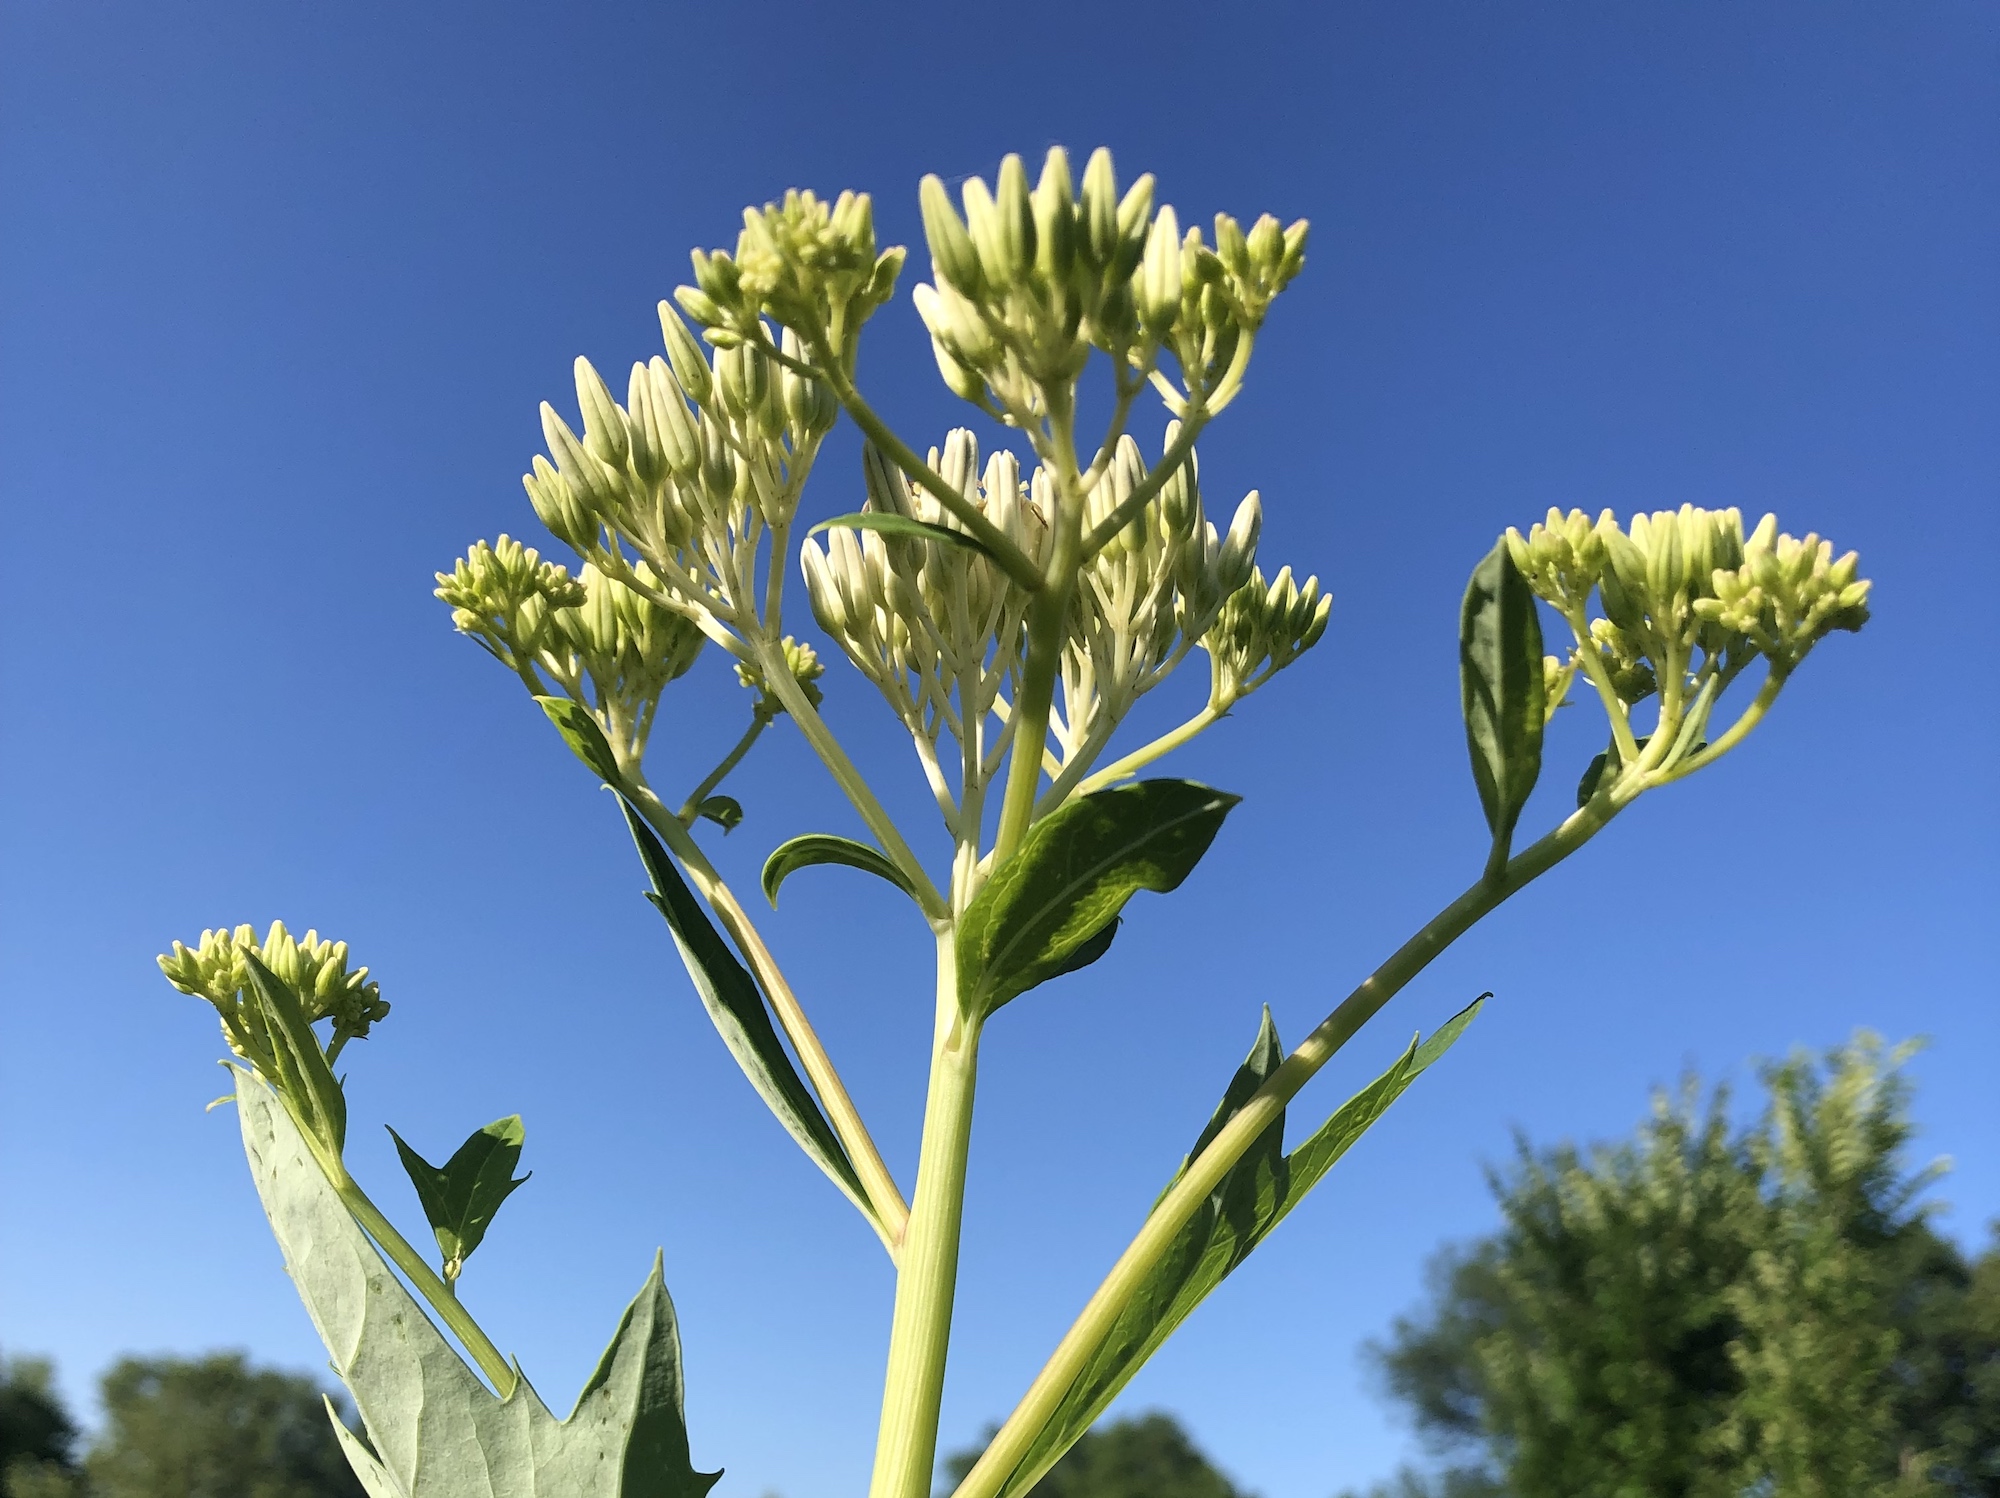 Pale Indian Plantain in Marion Dunn Prairie in Madison, Wisconsin on July 12, 2019.